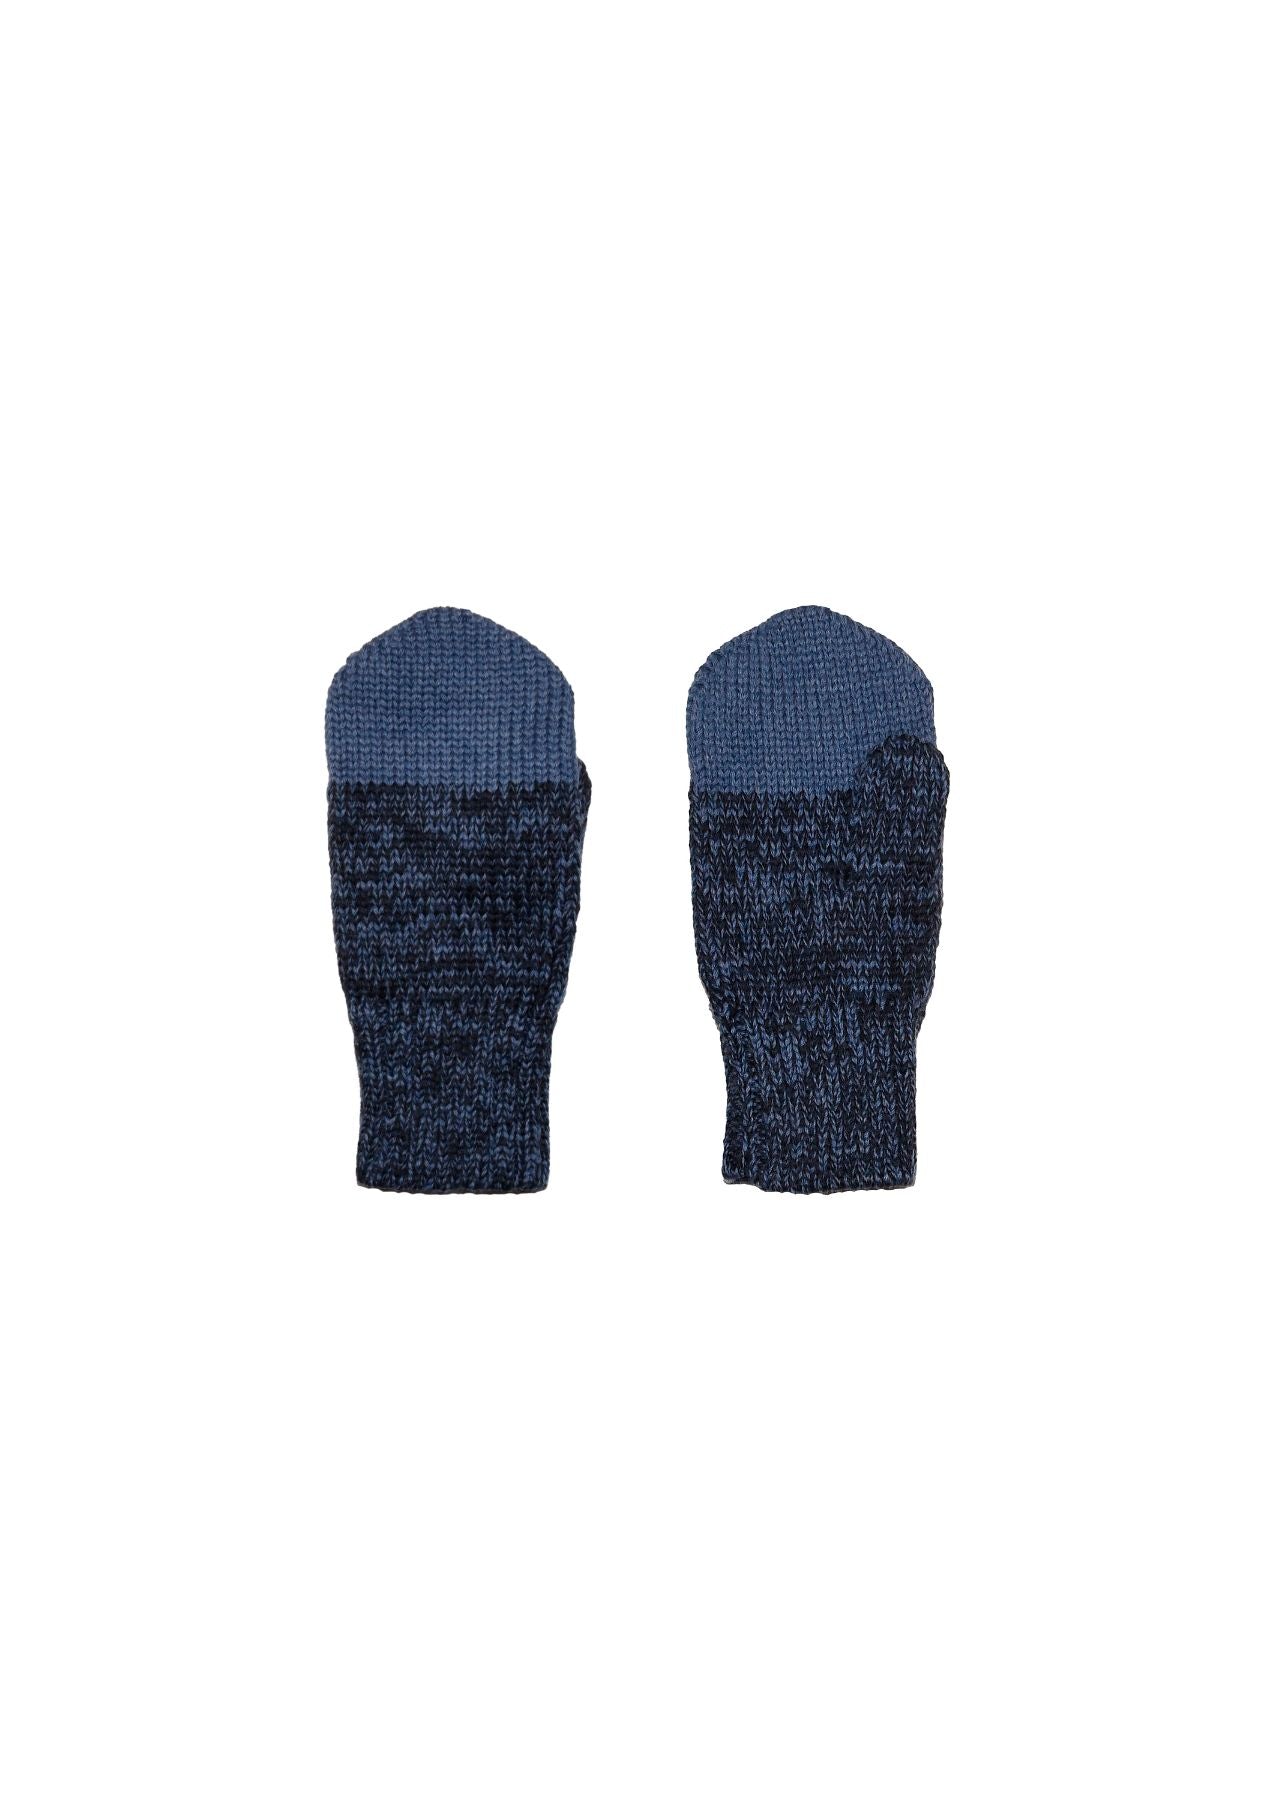 Shop soft and breathable merino wool mittens in blue colour to keep your child/baby warm in style. Soft and double, not itchy and easy to wear, made with 100% merino wool. The best winter essentials for babies and kids to keep them warm during winter and colder weather. The best and most practical gift for Christmas.